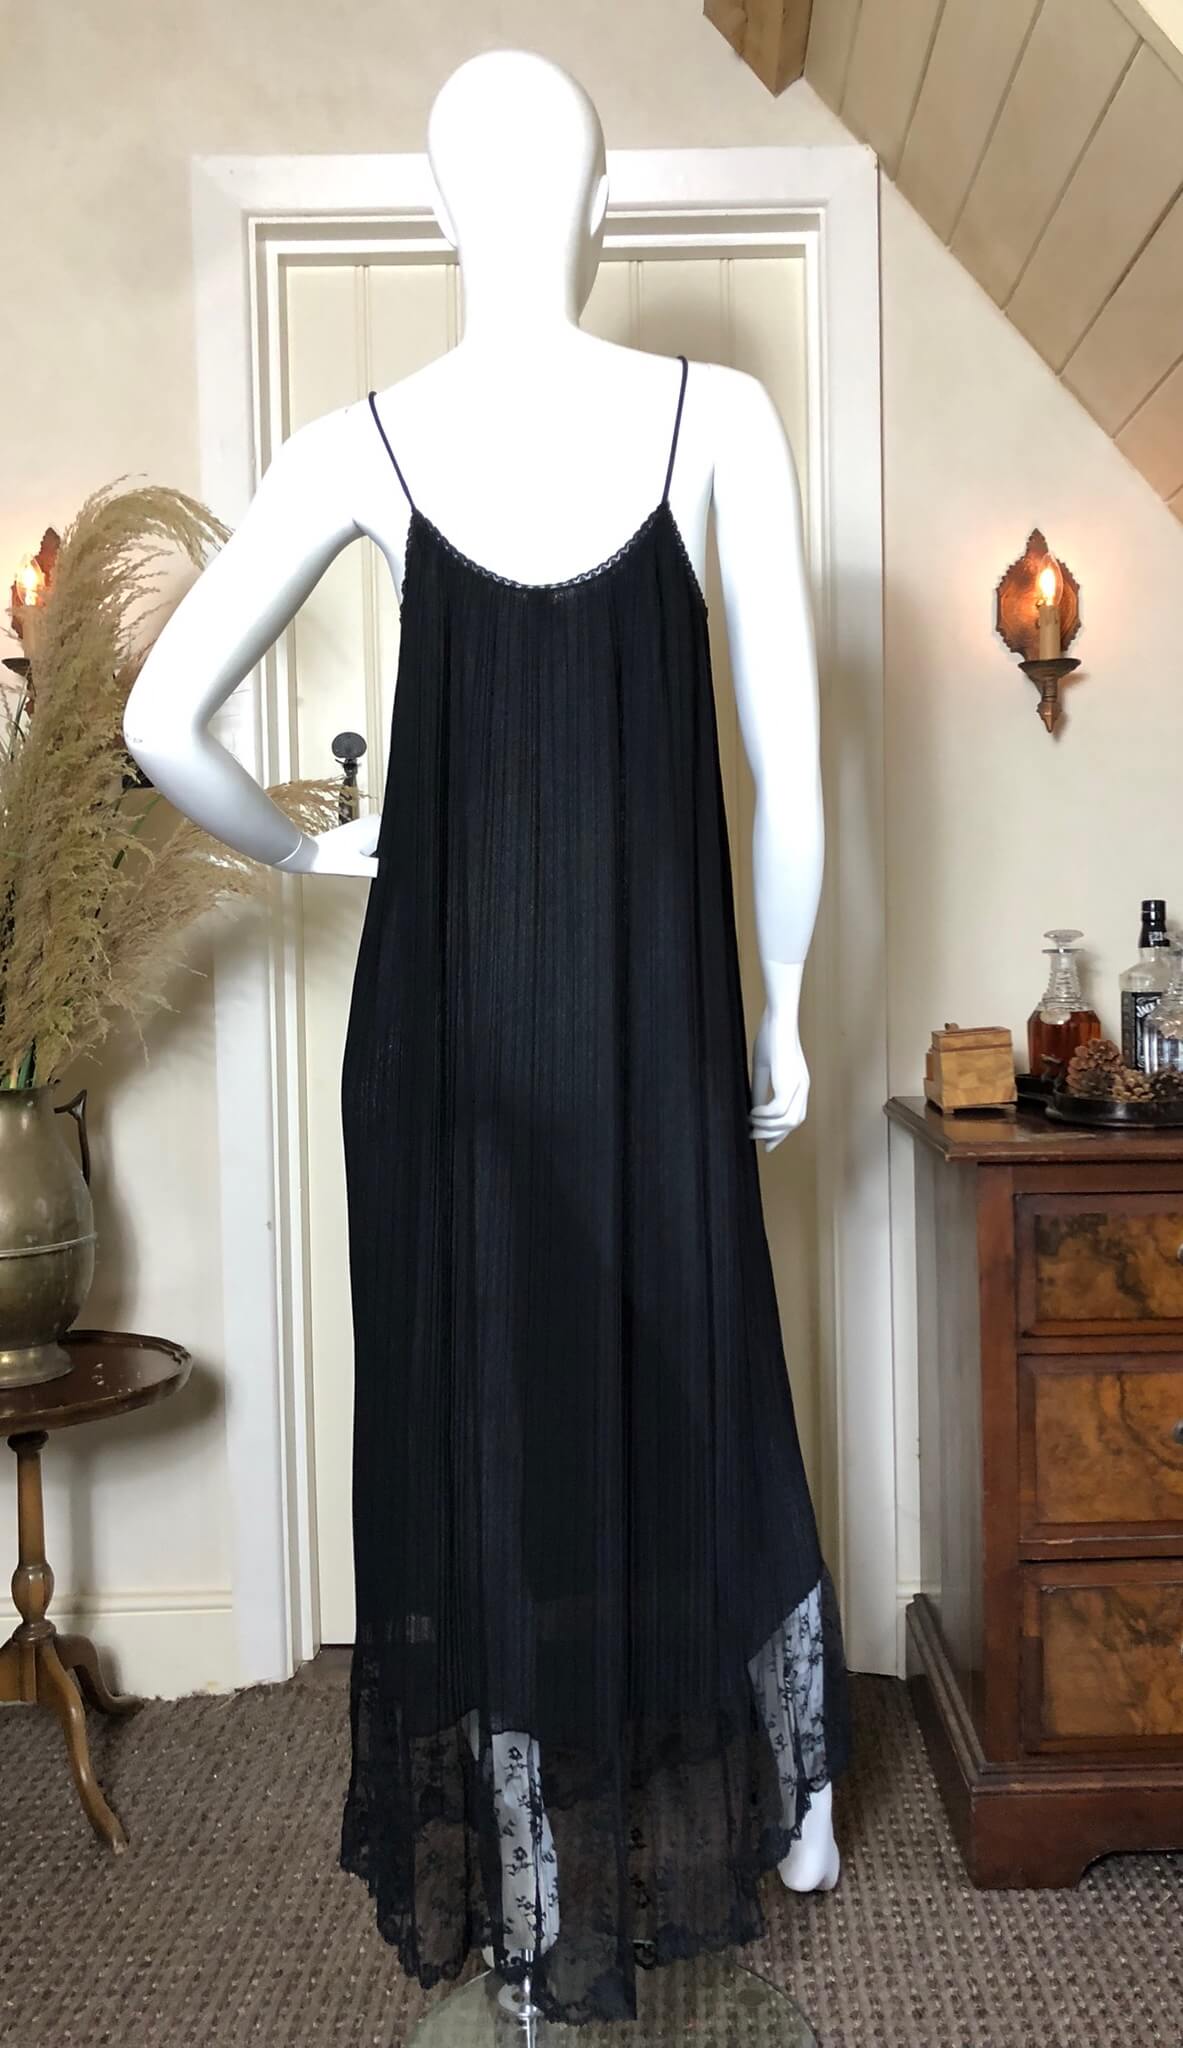 Black cheesecloth style dress